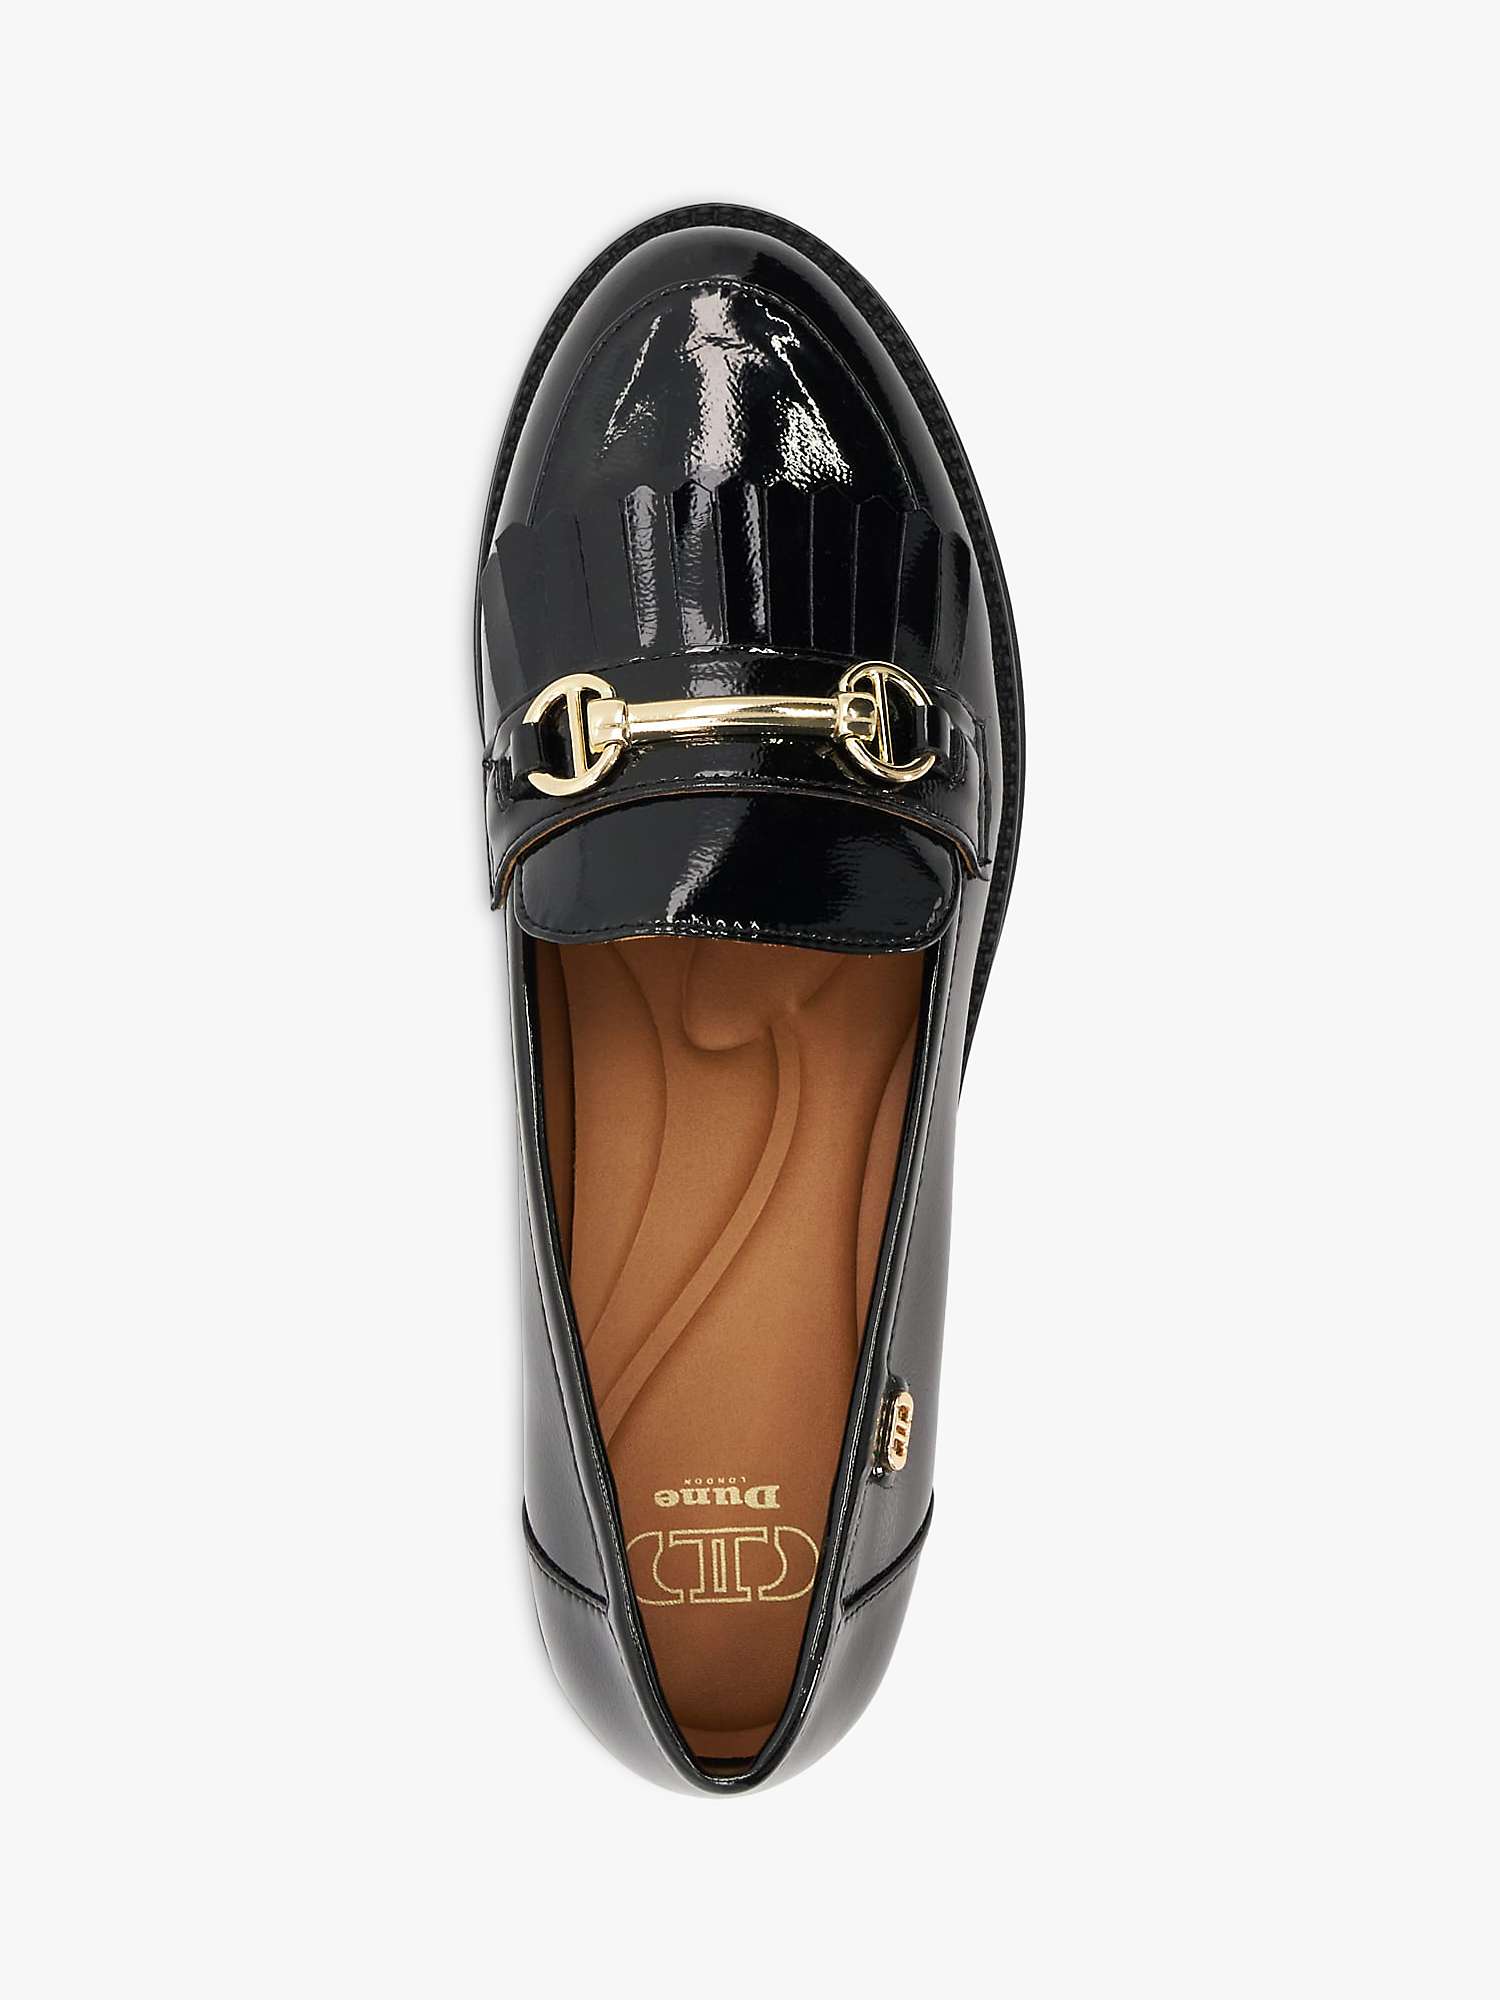 Dune Gestures Patent Loafers, Black at John Lewis & Partners